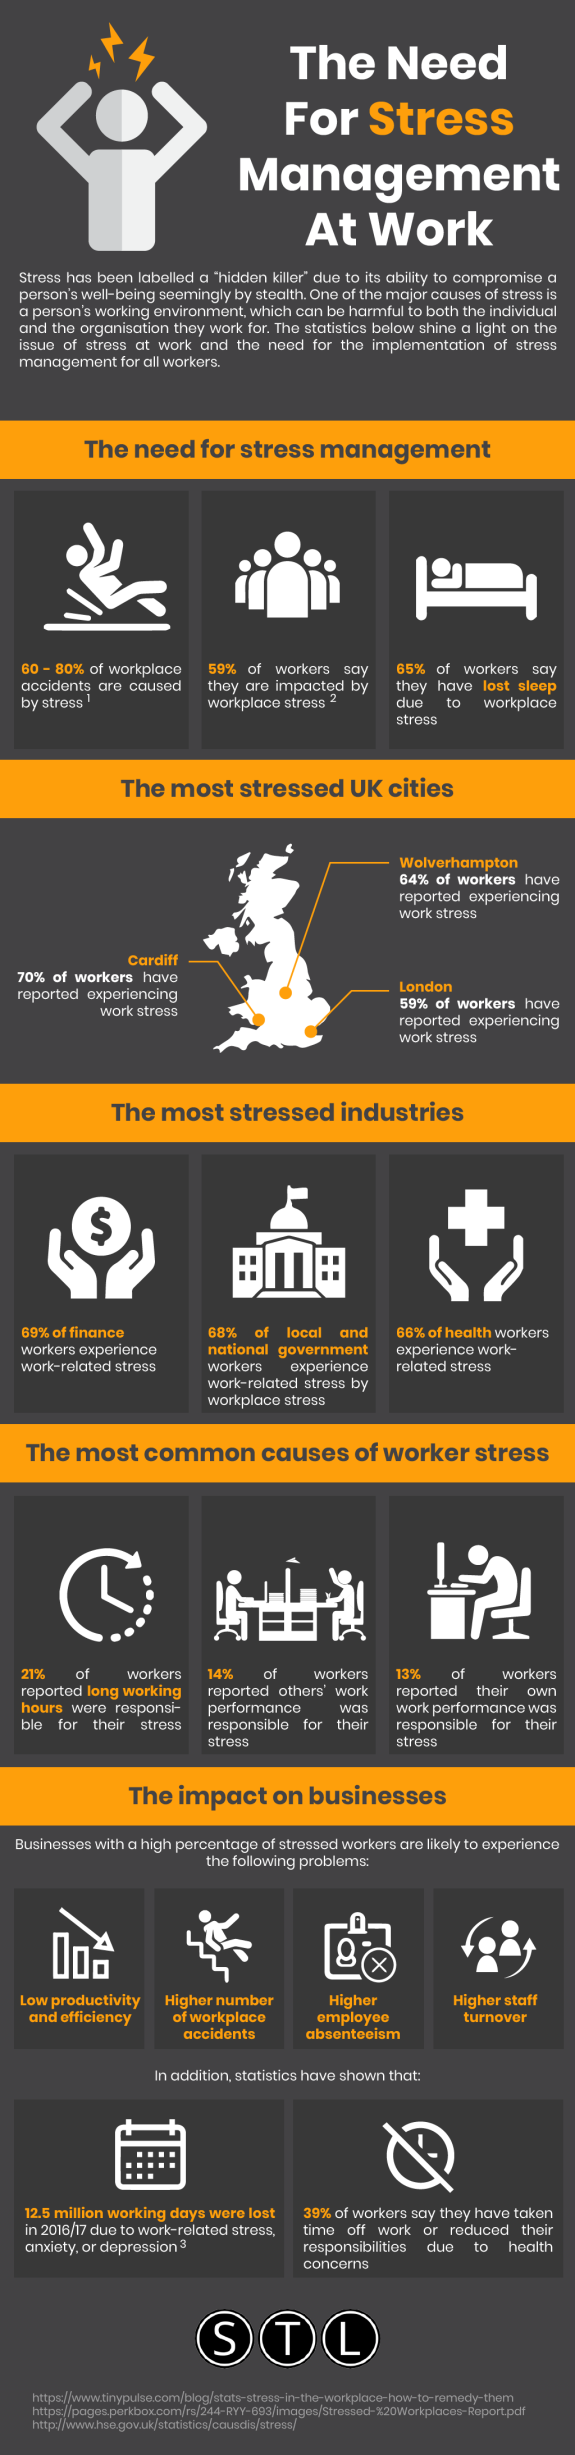 The Need for Stress Management at Work